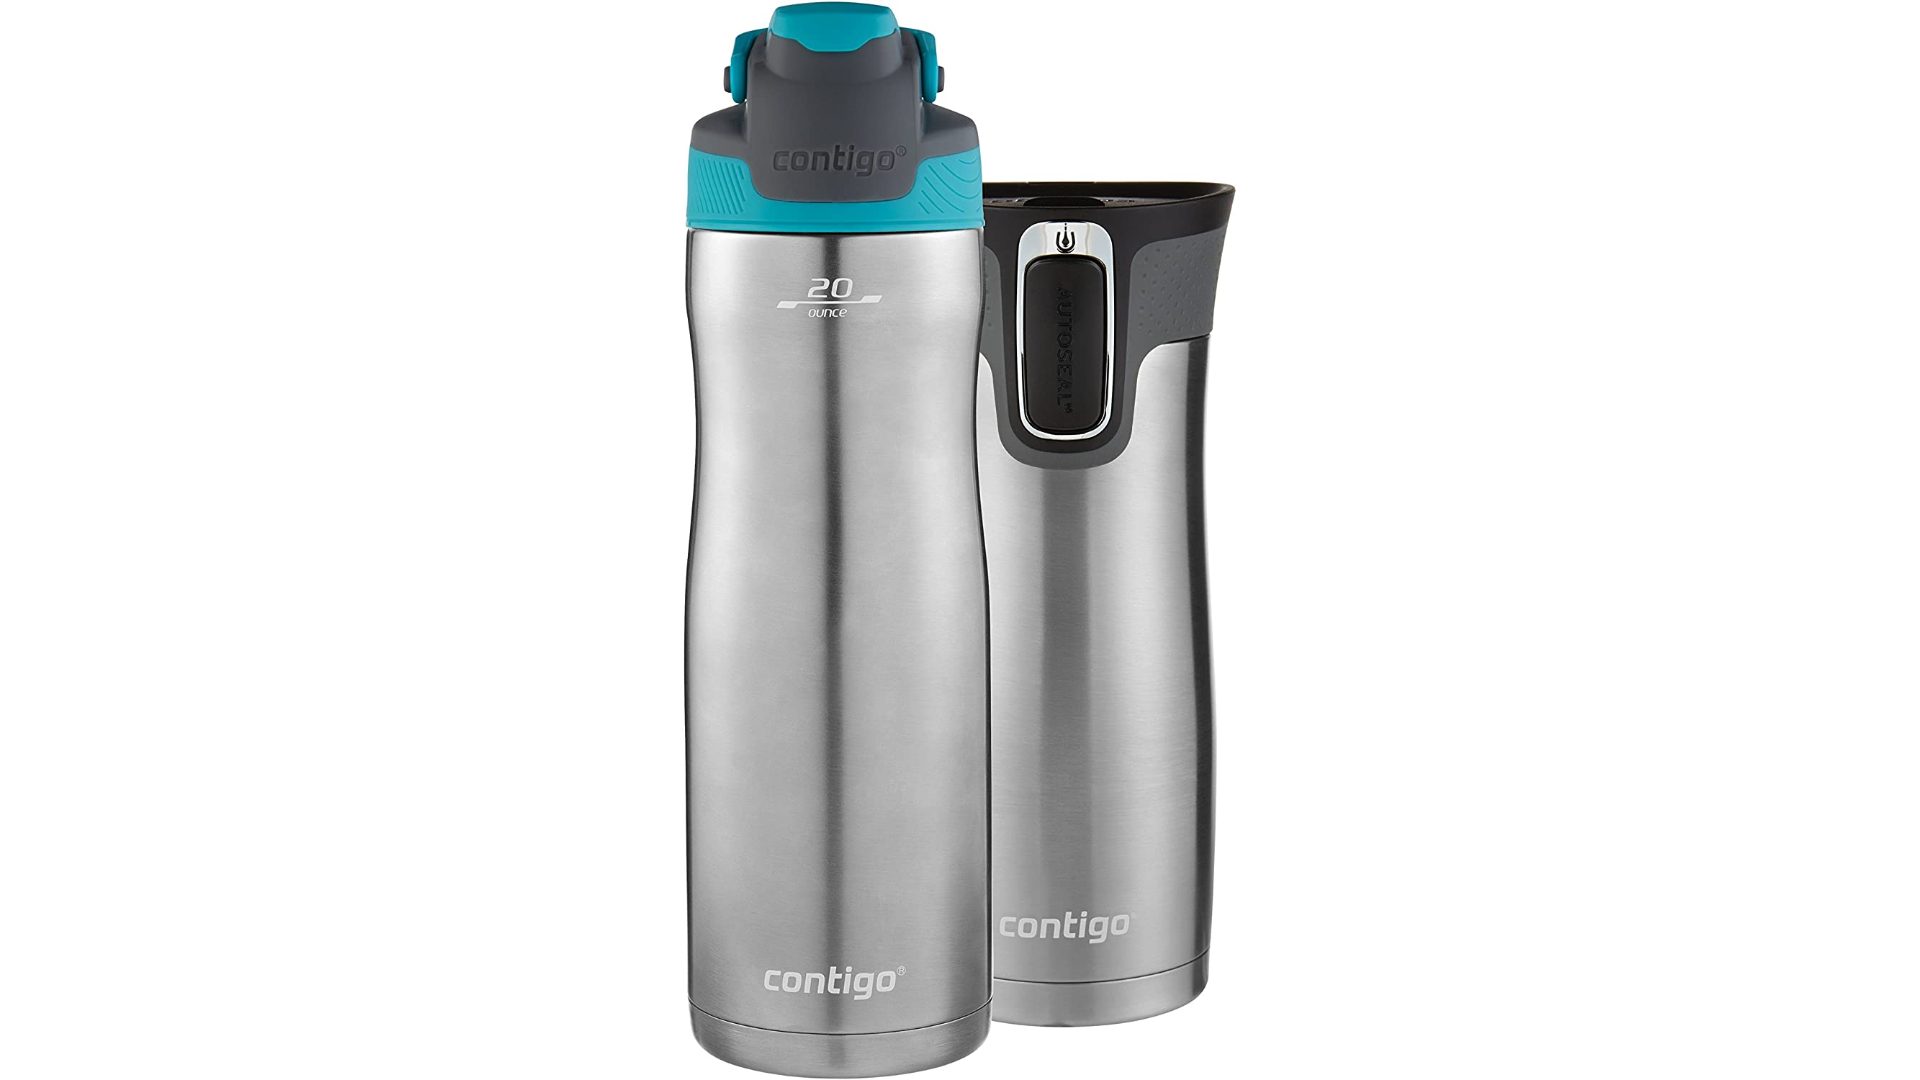 Grab a brand new Contigo water bottle from just $12 Prime shipped